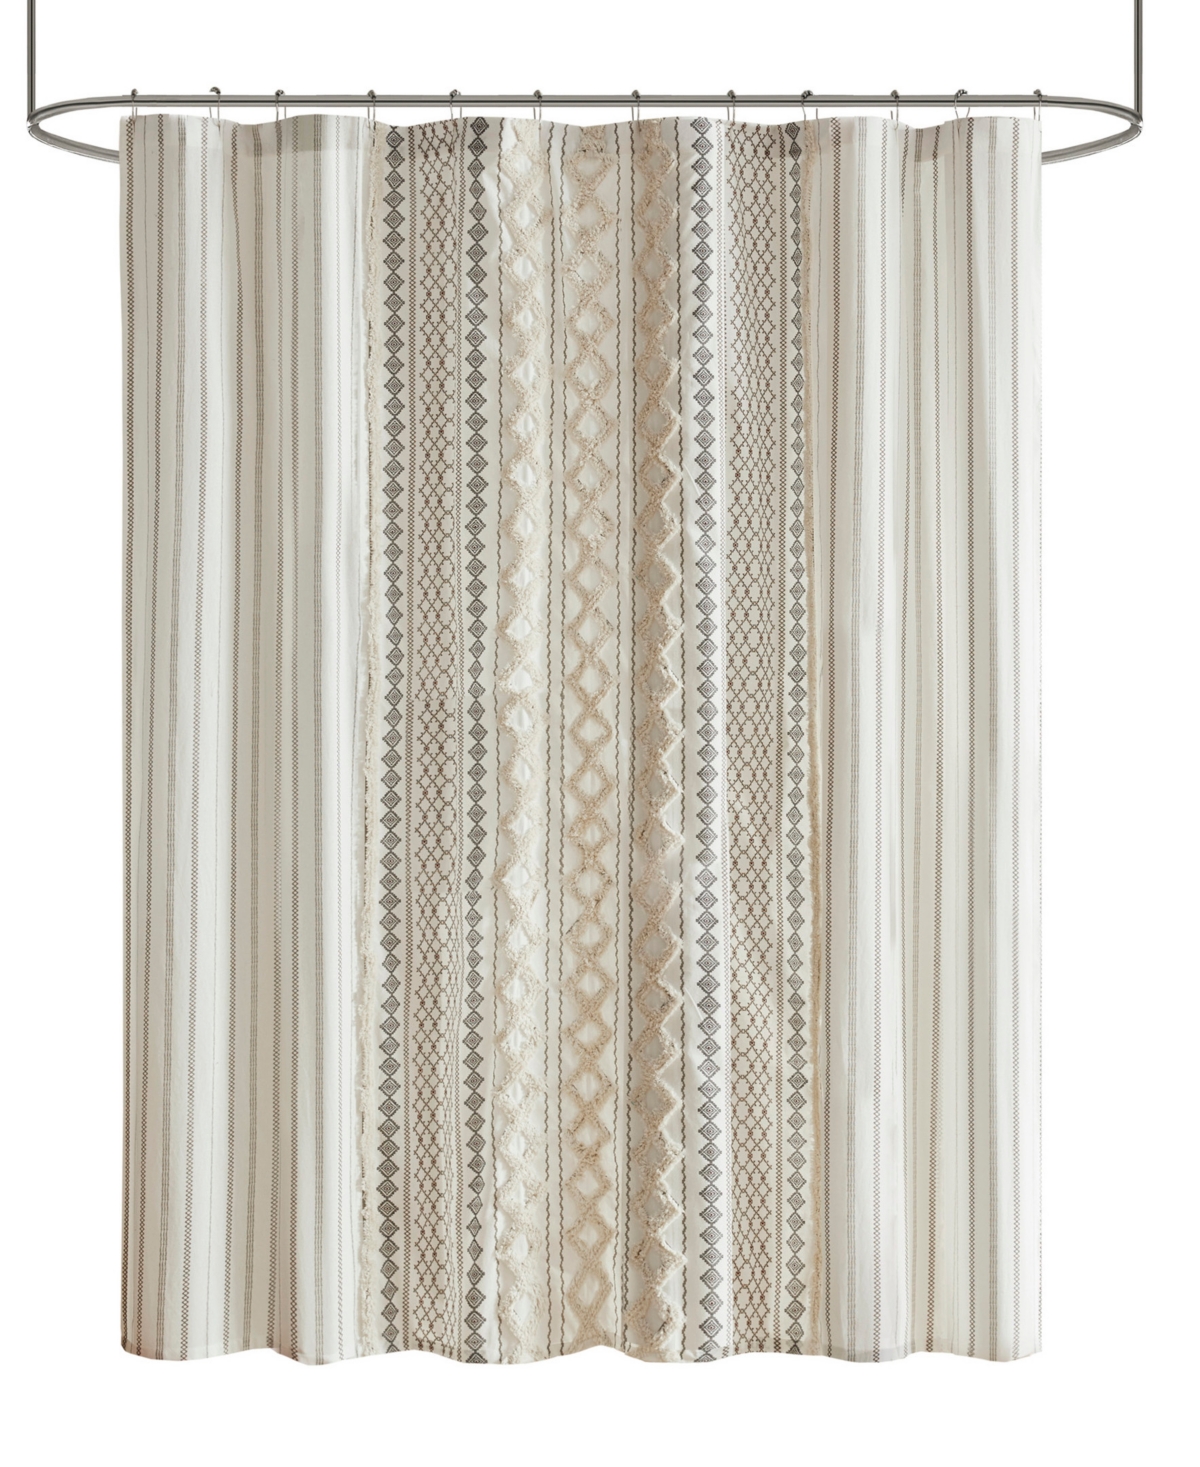 Ink+ivy Imani Stripe Cotton Chenille Shower Curtain, 72" X 72" In Ivory